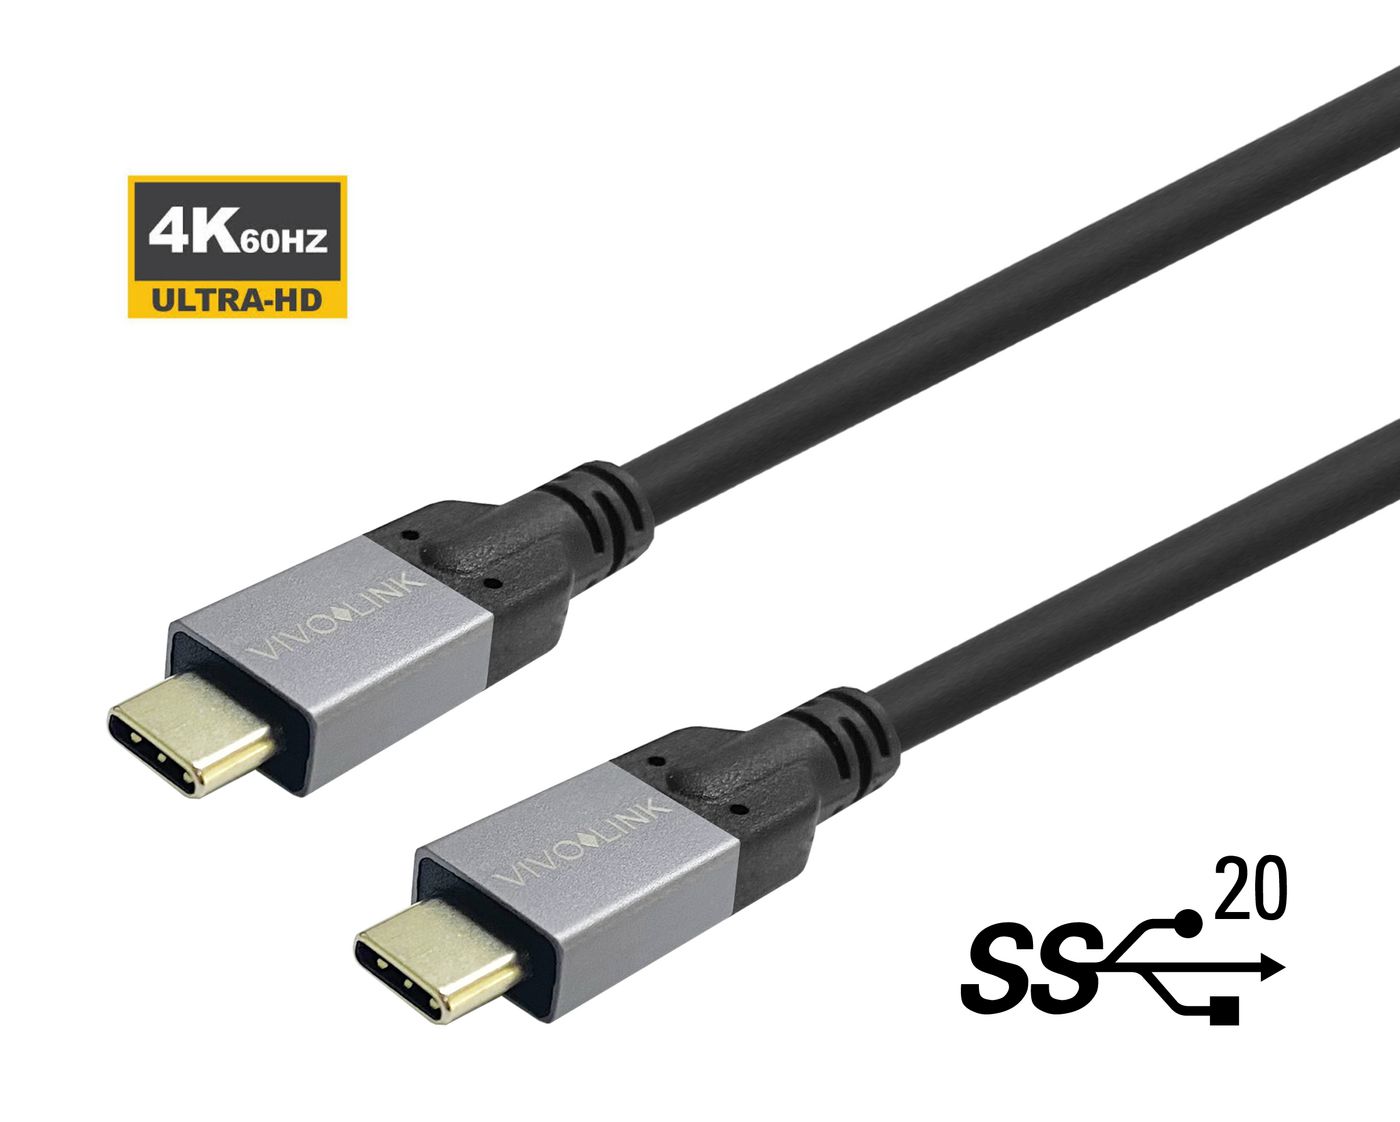 EET USB-C to Cable 0.5m Supports 20 Gbps data - Kabel - Digital/Daten (PROUSBCMM0.5)